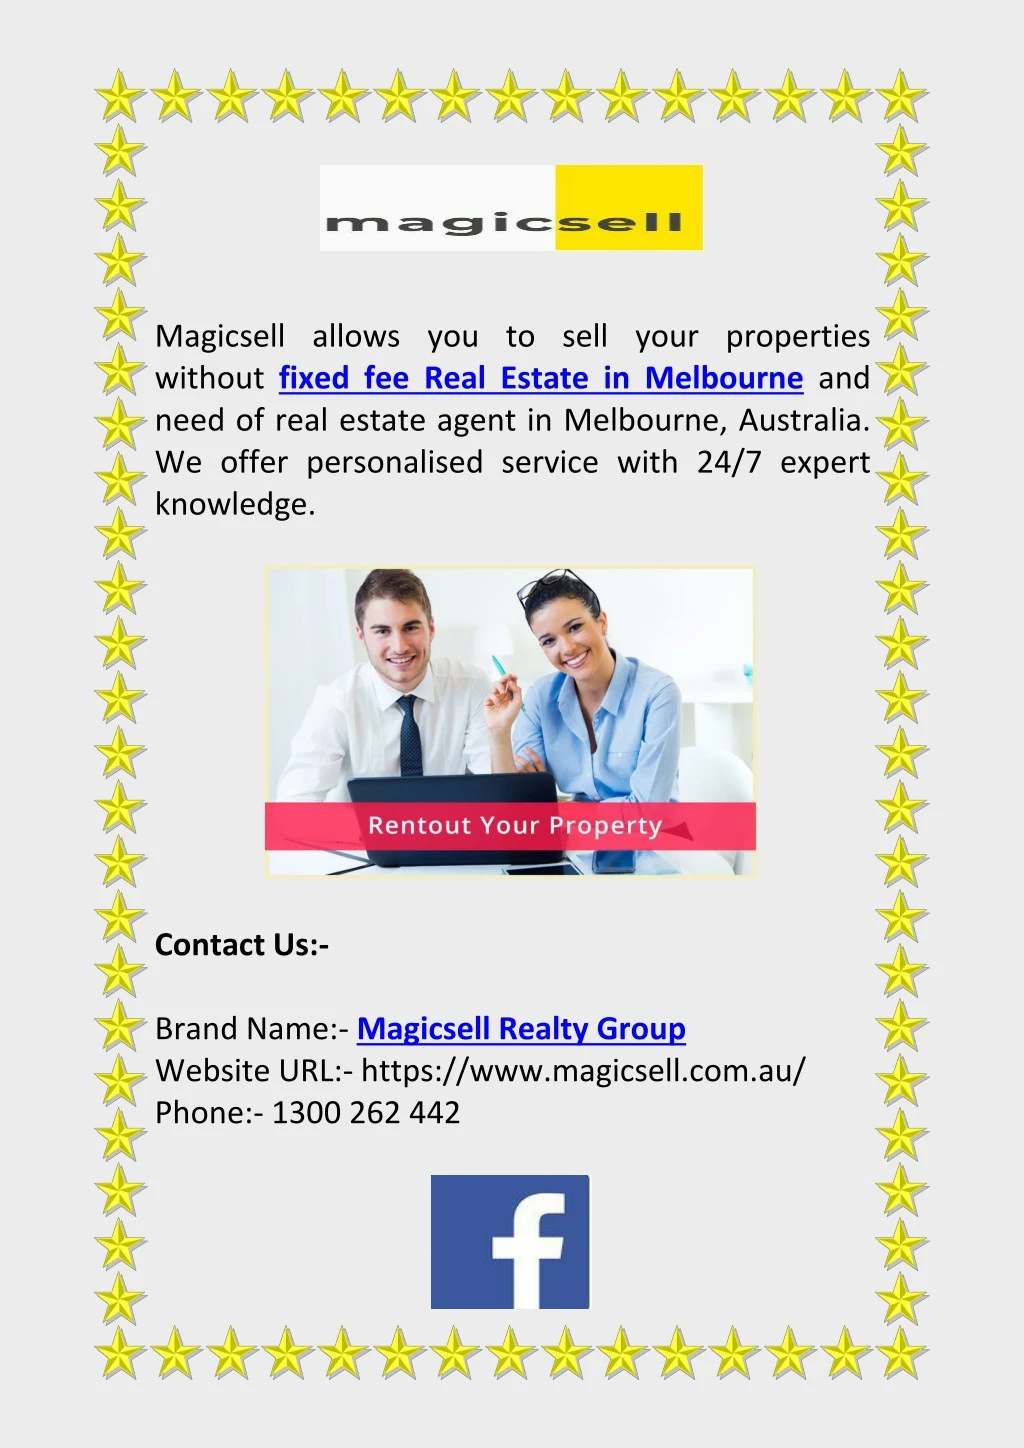 magicsell allows you to sell your properties